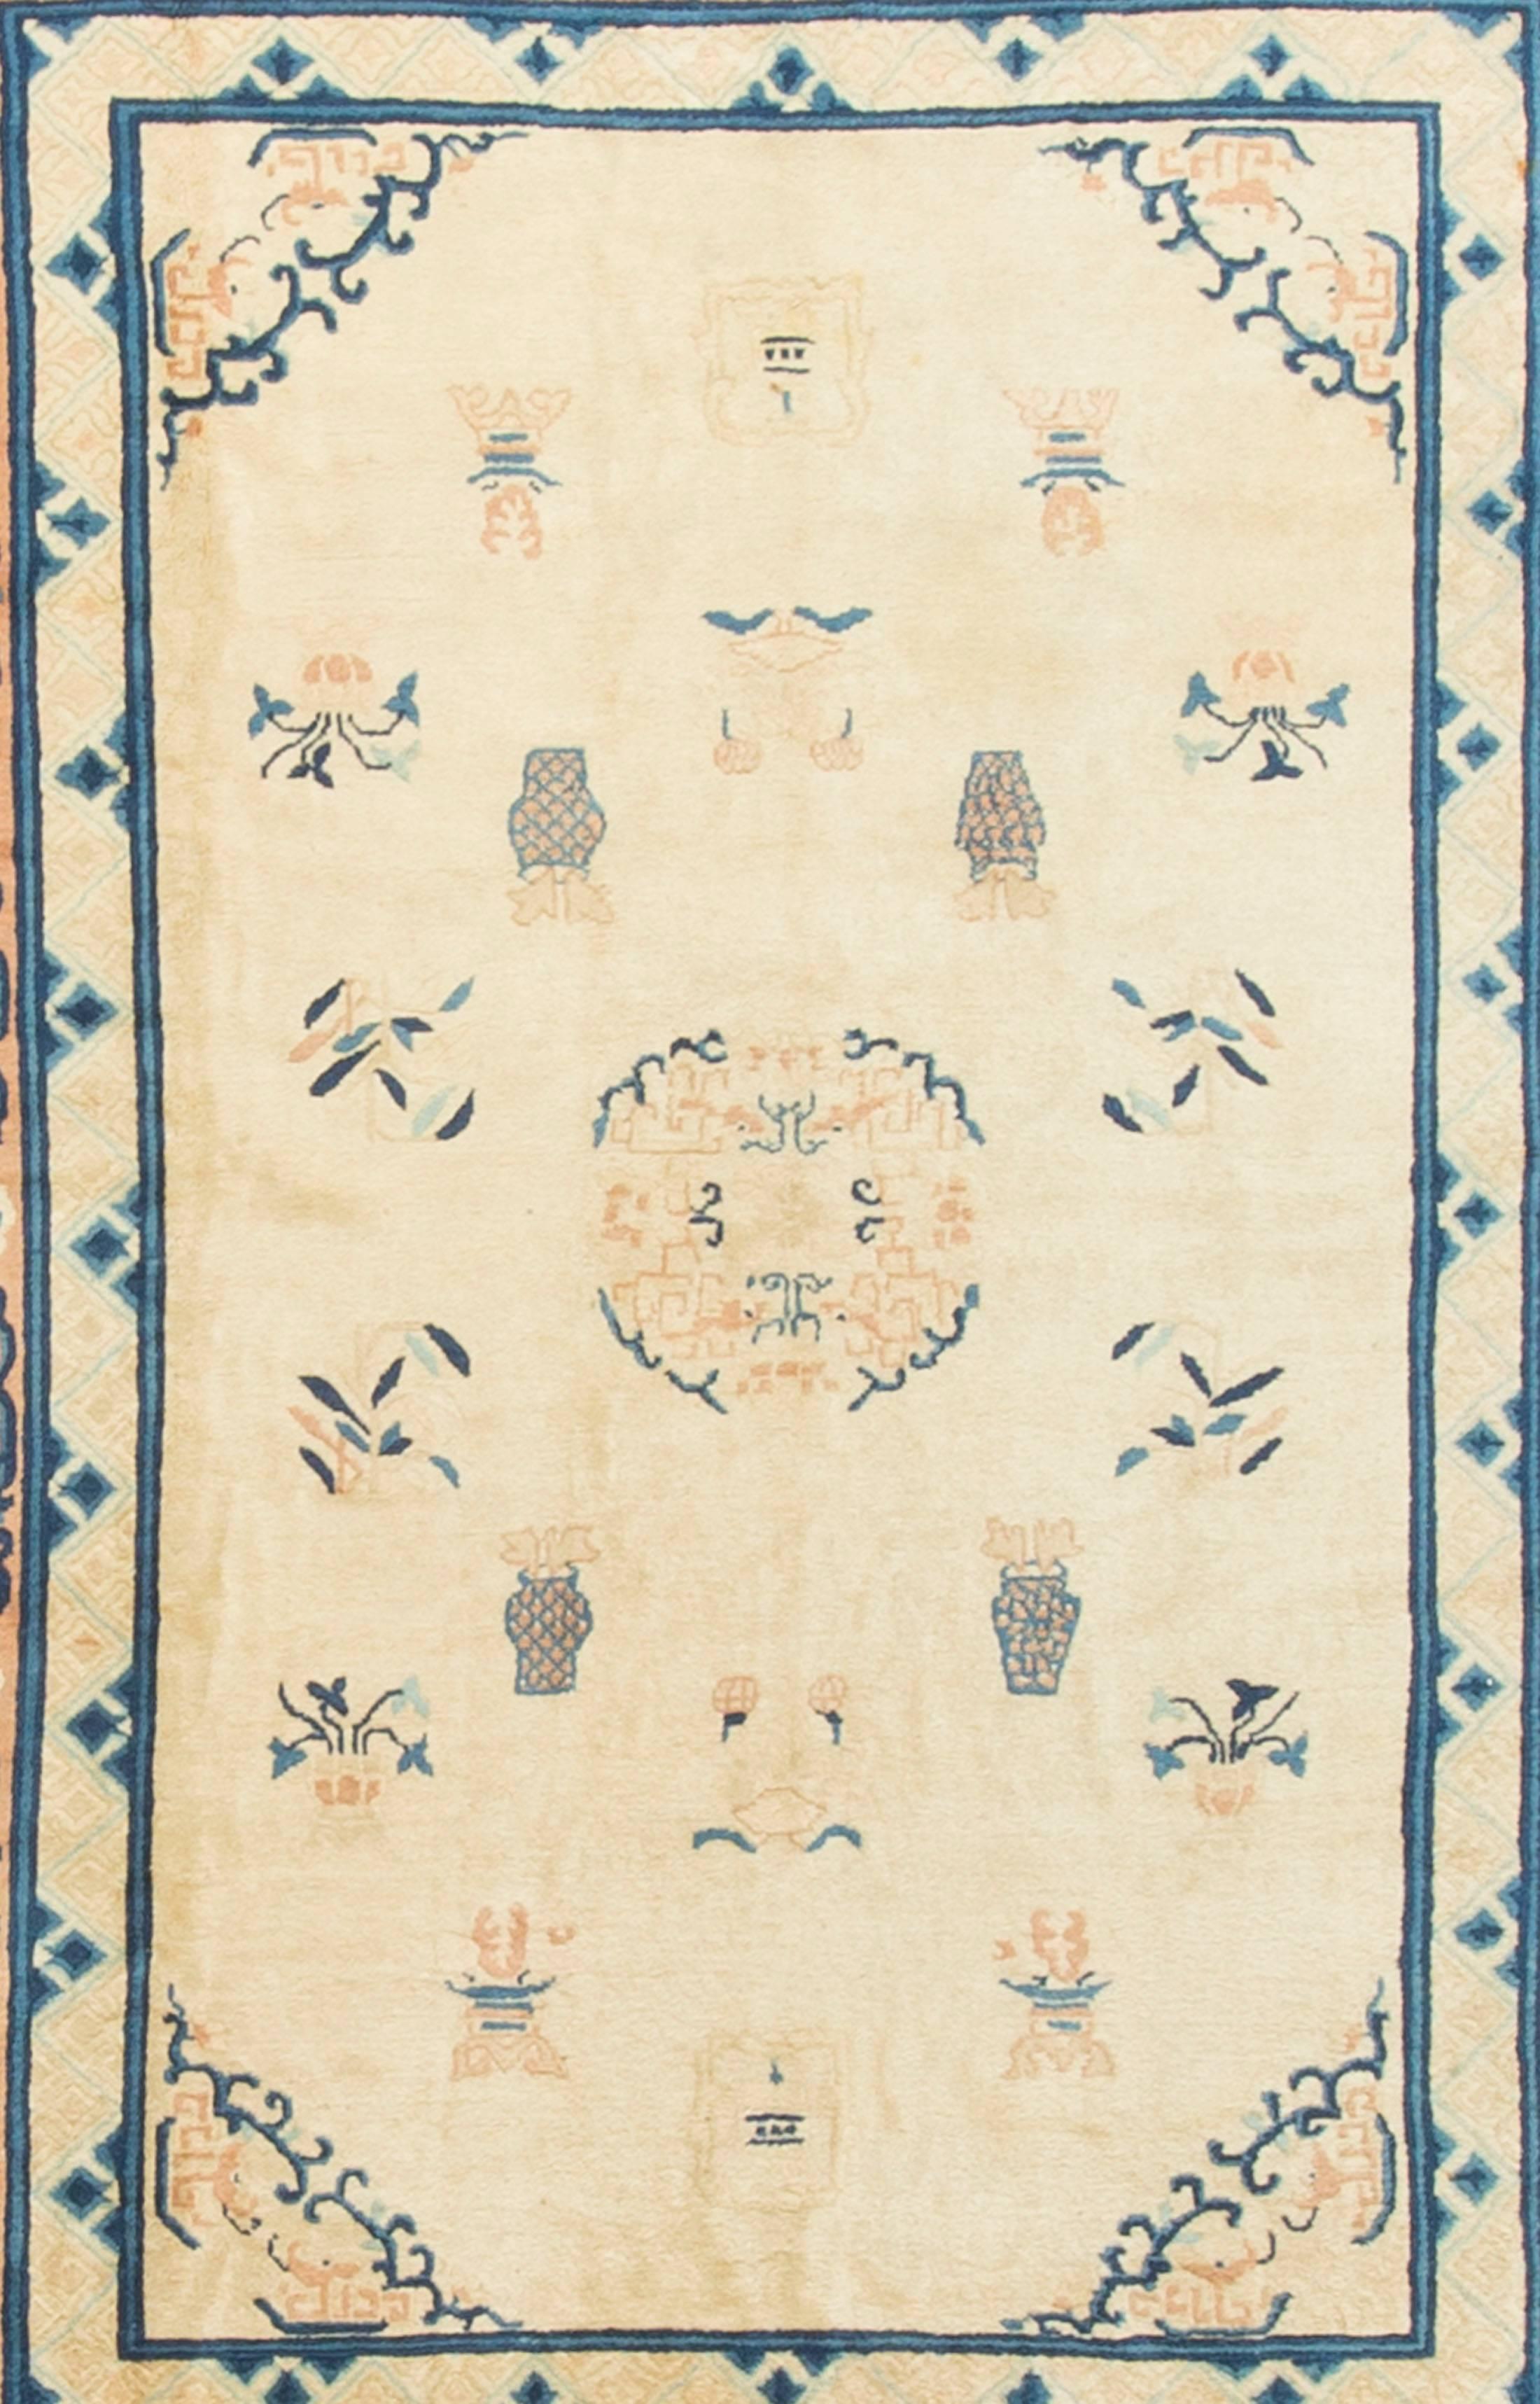 Antique Chinese Peking Rug Carpet Circa 1900. Weaving in Peking began circa 1900 during the revival of Chinese carpet manufacturing when the other weaving areas such as Ningxia moved to the capital. Peking rugs are normally Minimalist with a narrow